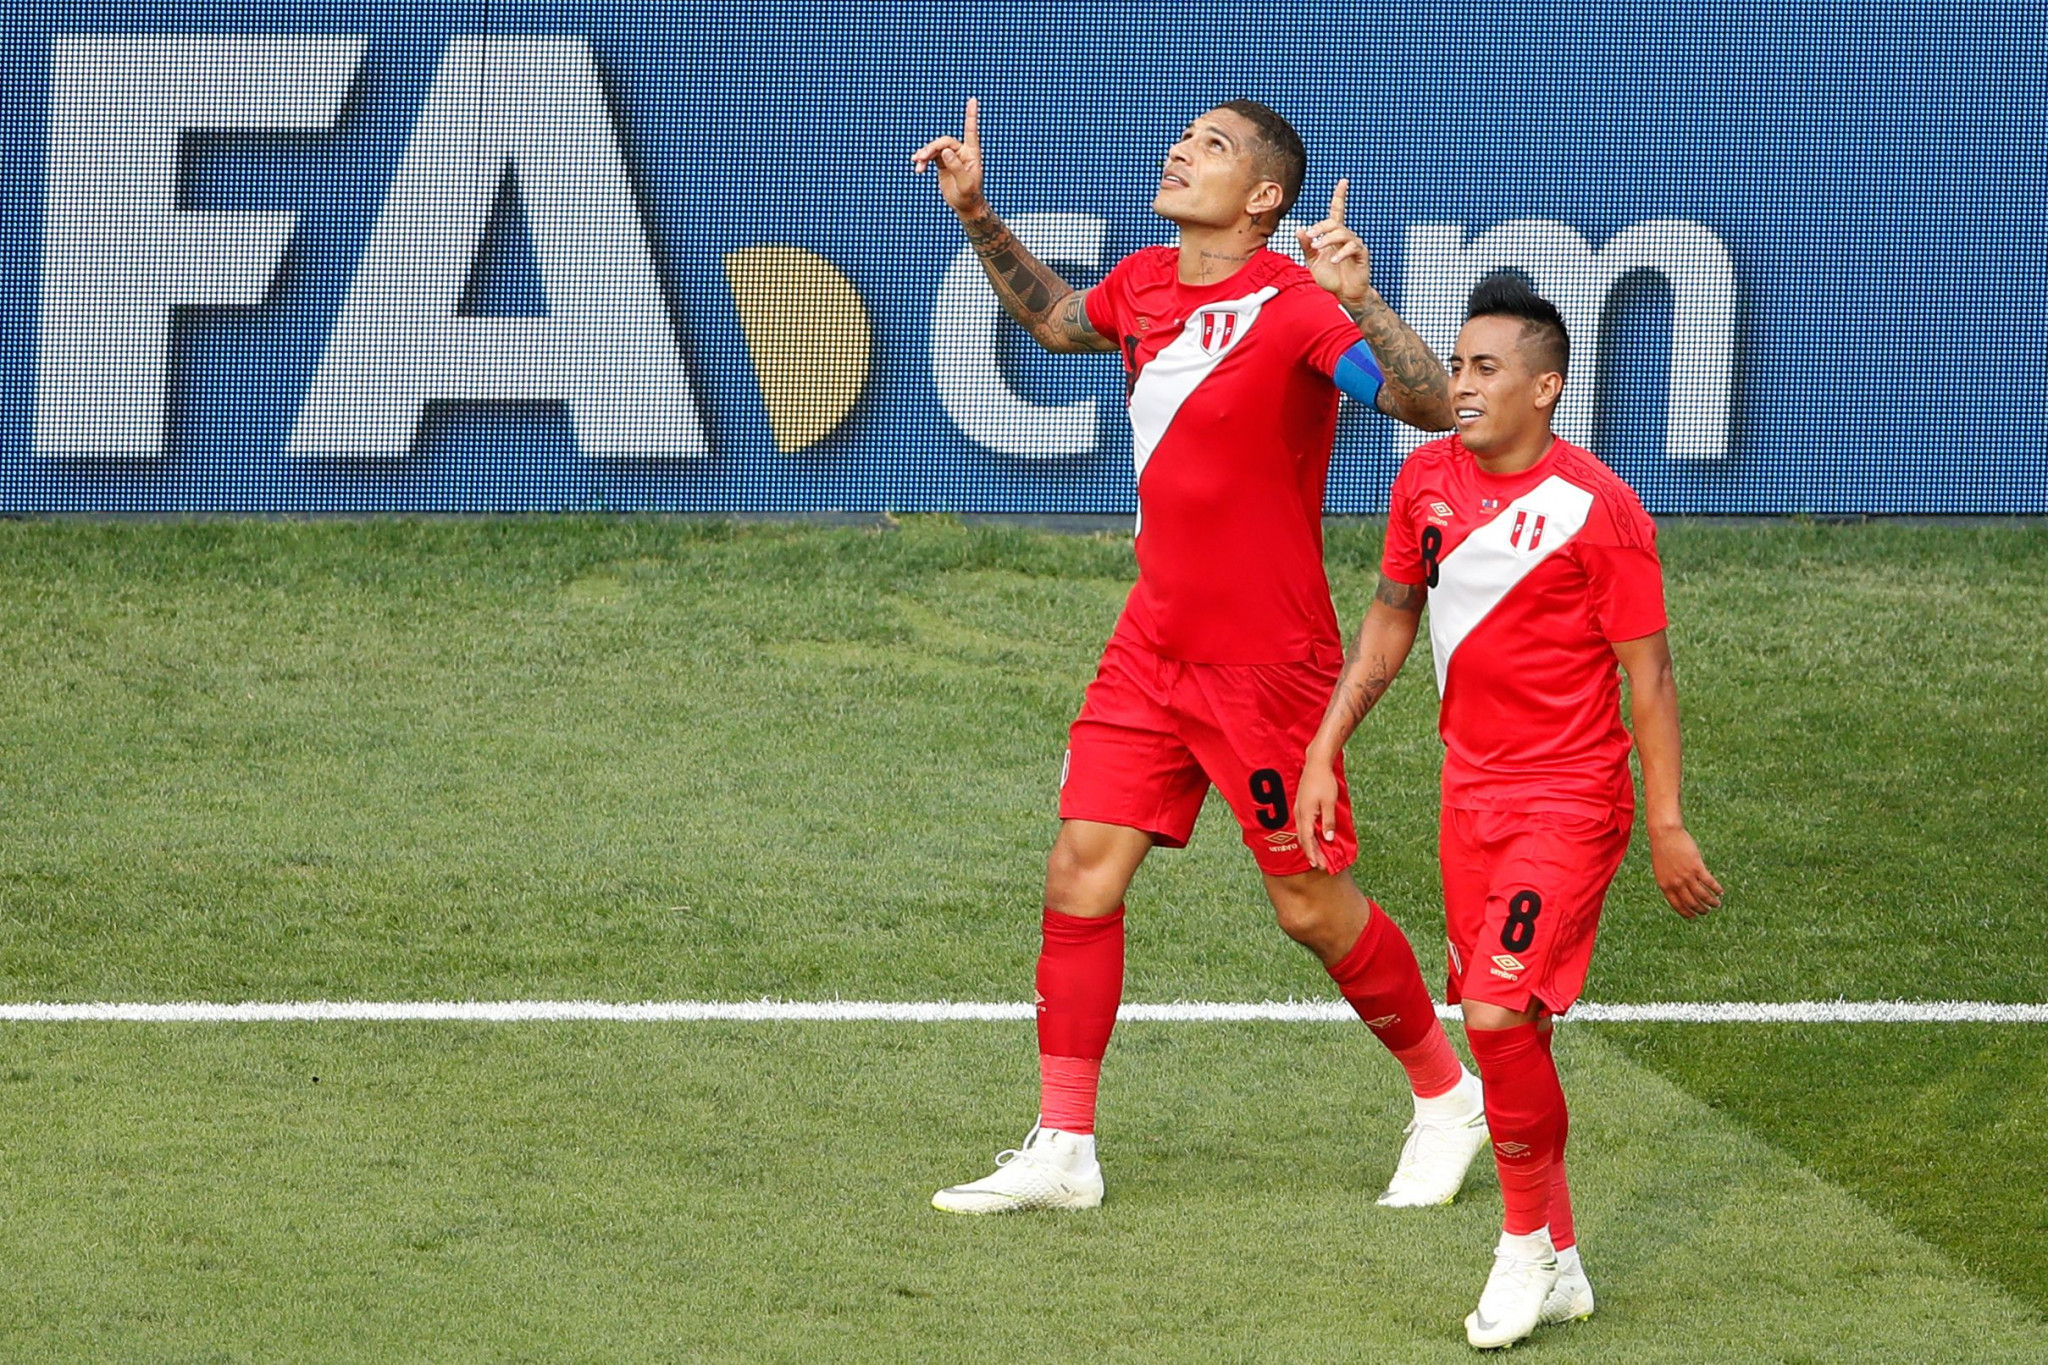 Paolo Guerrero scored for Peru against Australia at the FIFA World Cup, but his side exited after the group phase ©Getty Images